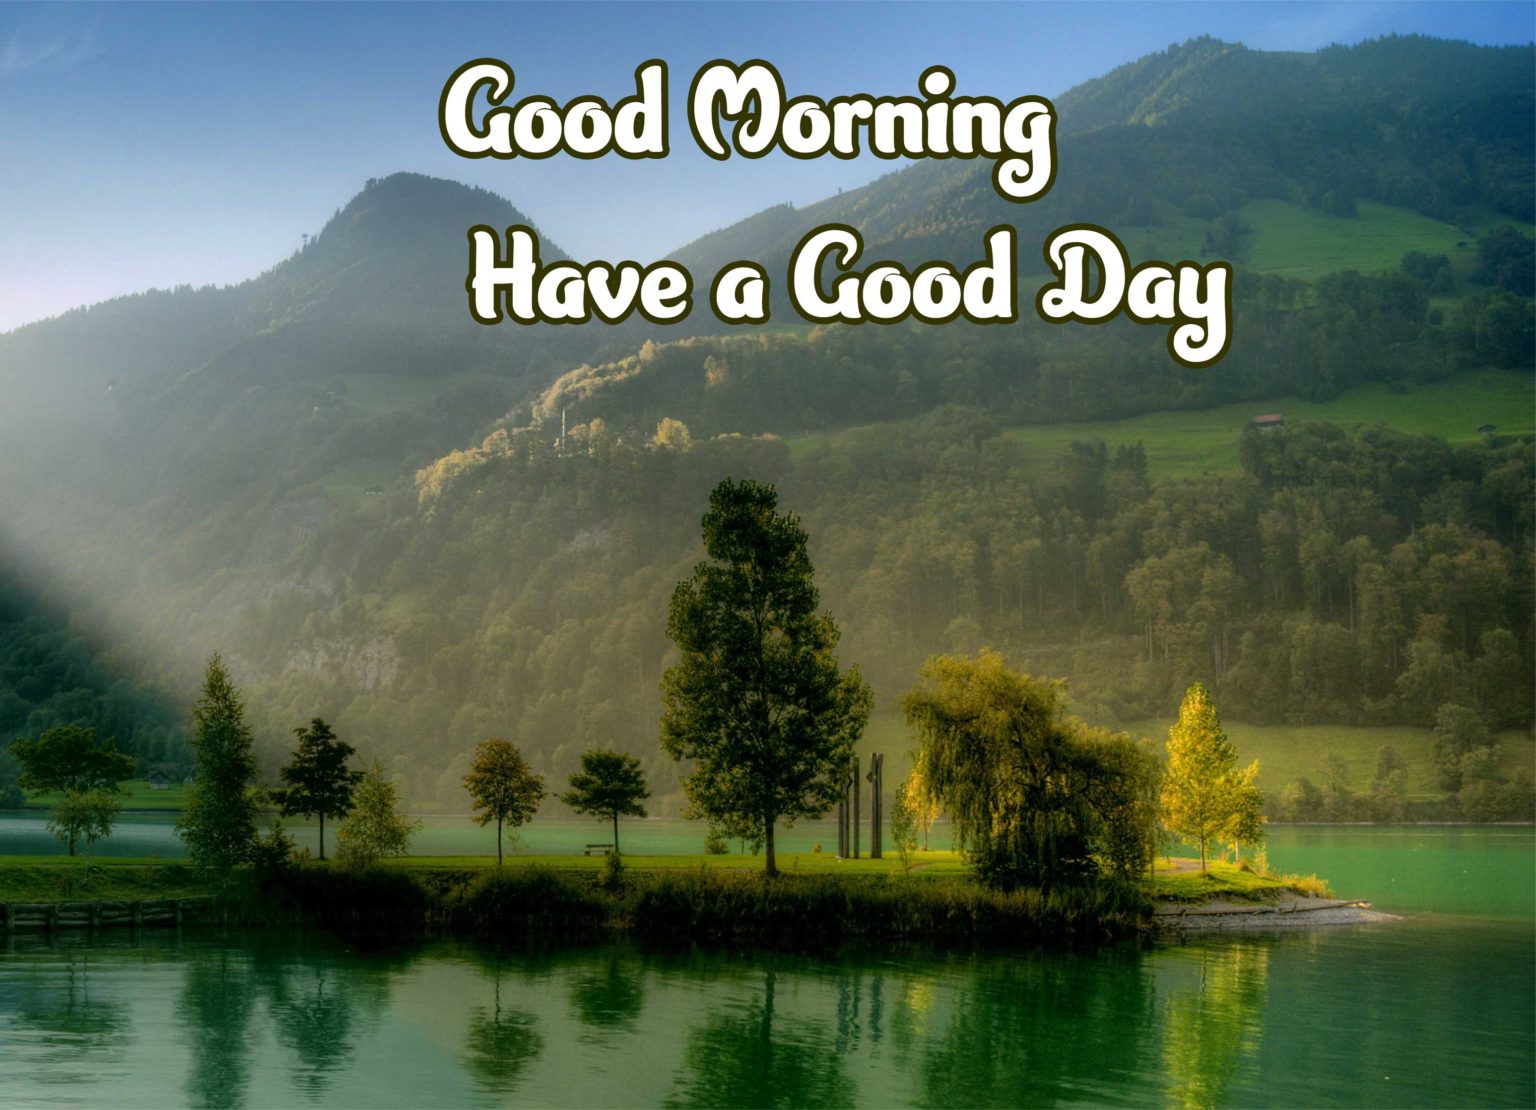 70+ Good Morning Hills Images & Wishes - Good Morning Wishes, Images ...